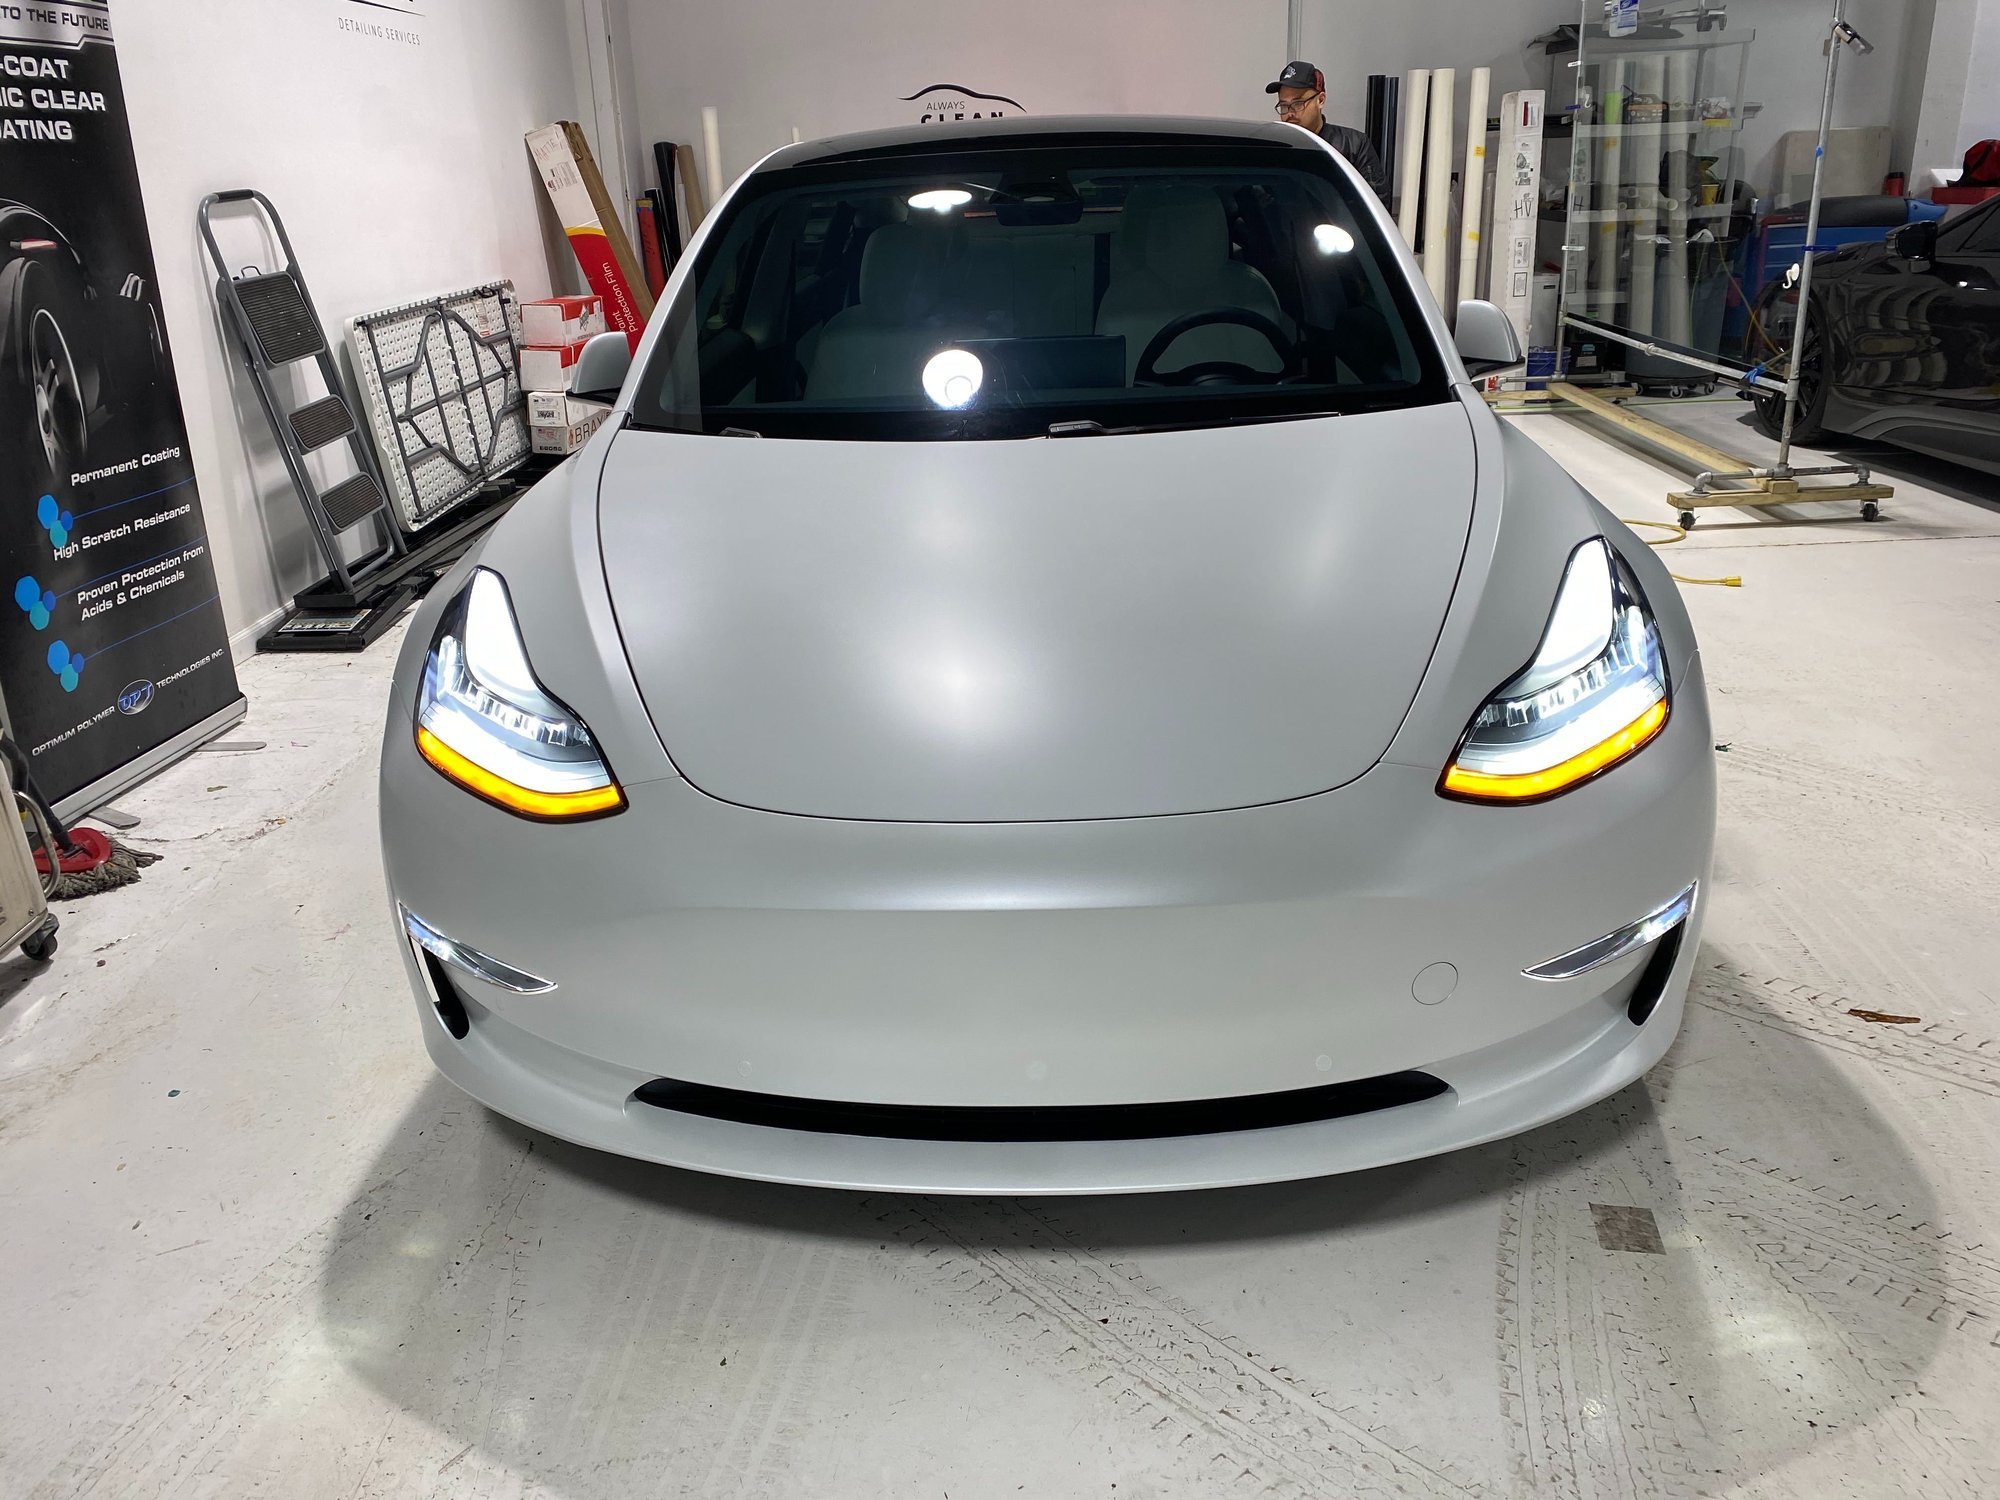 XPEL Stealth satin finish PPF easy to maintain ? | Page 5 | Tesla Motors  Club